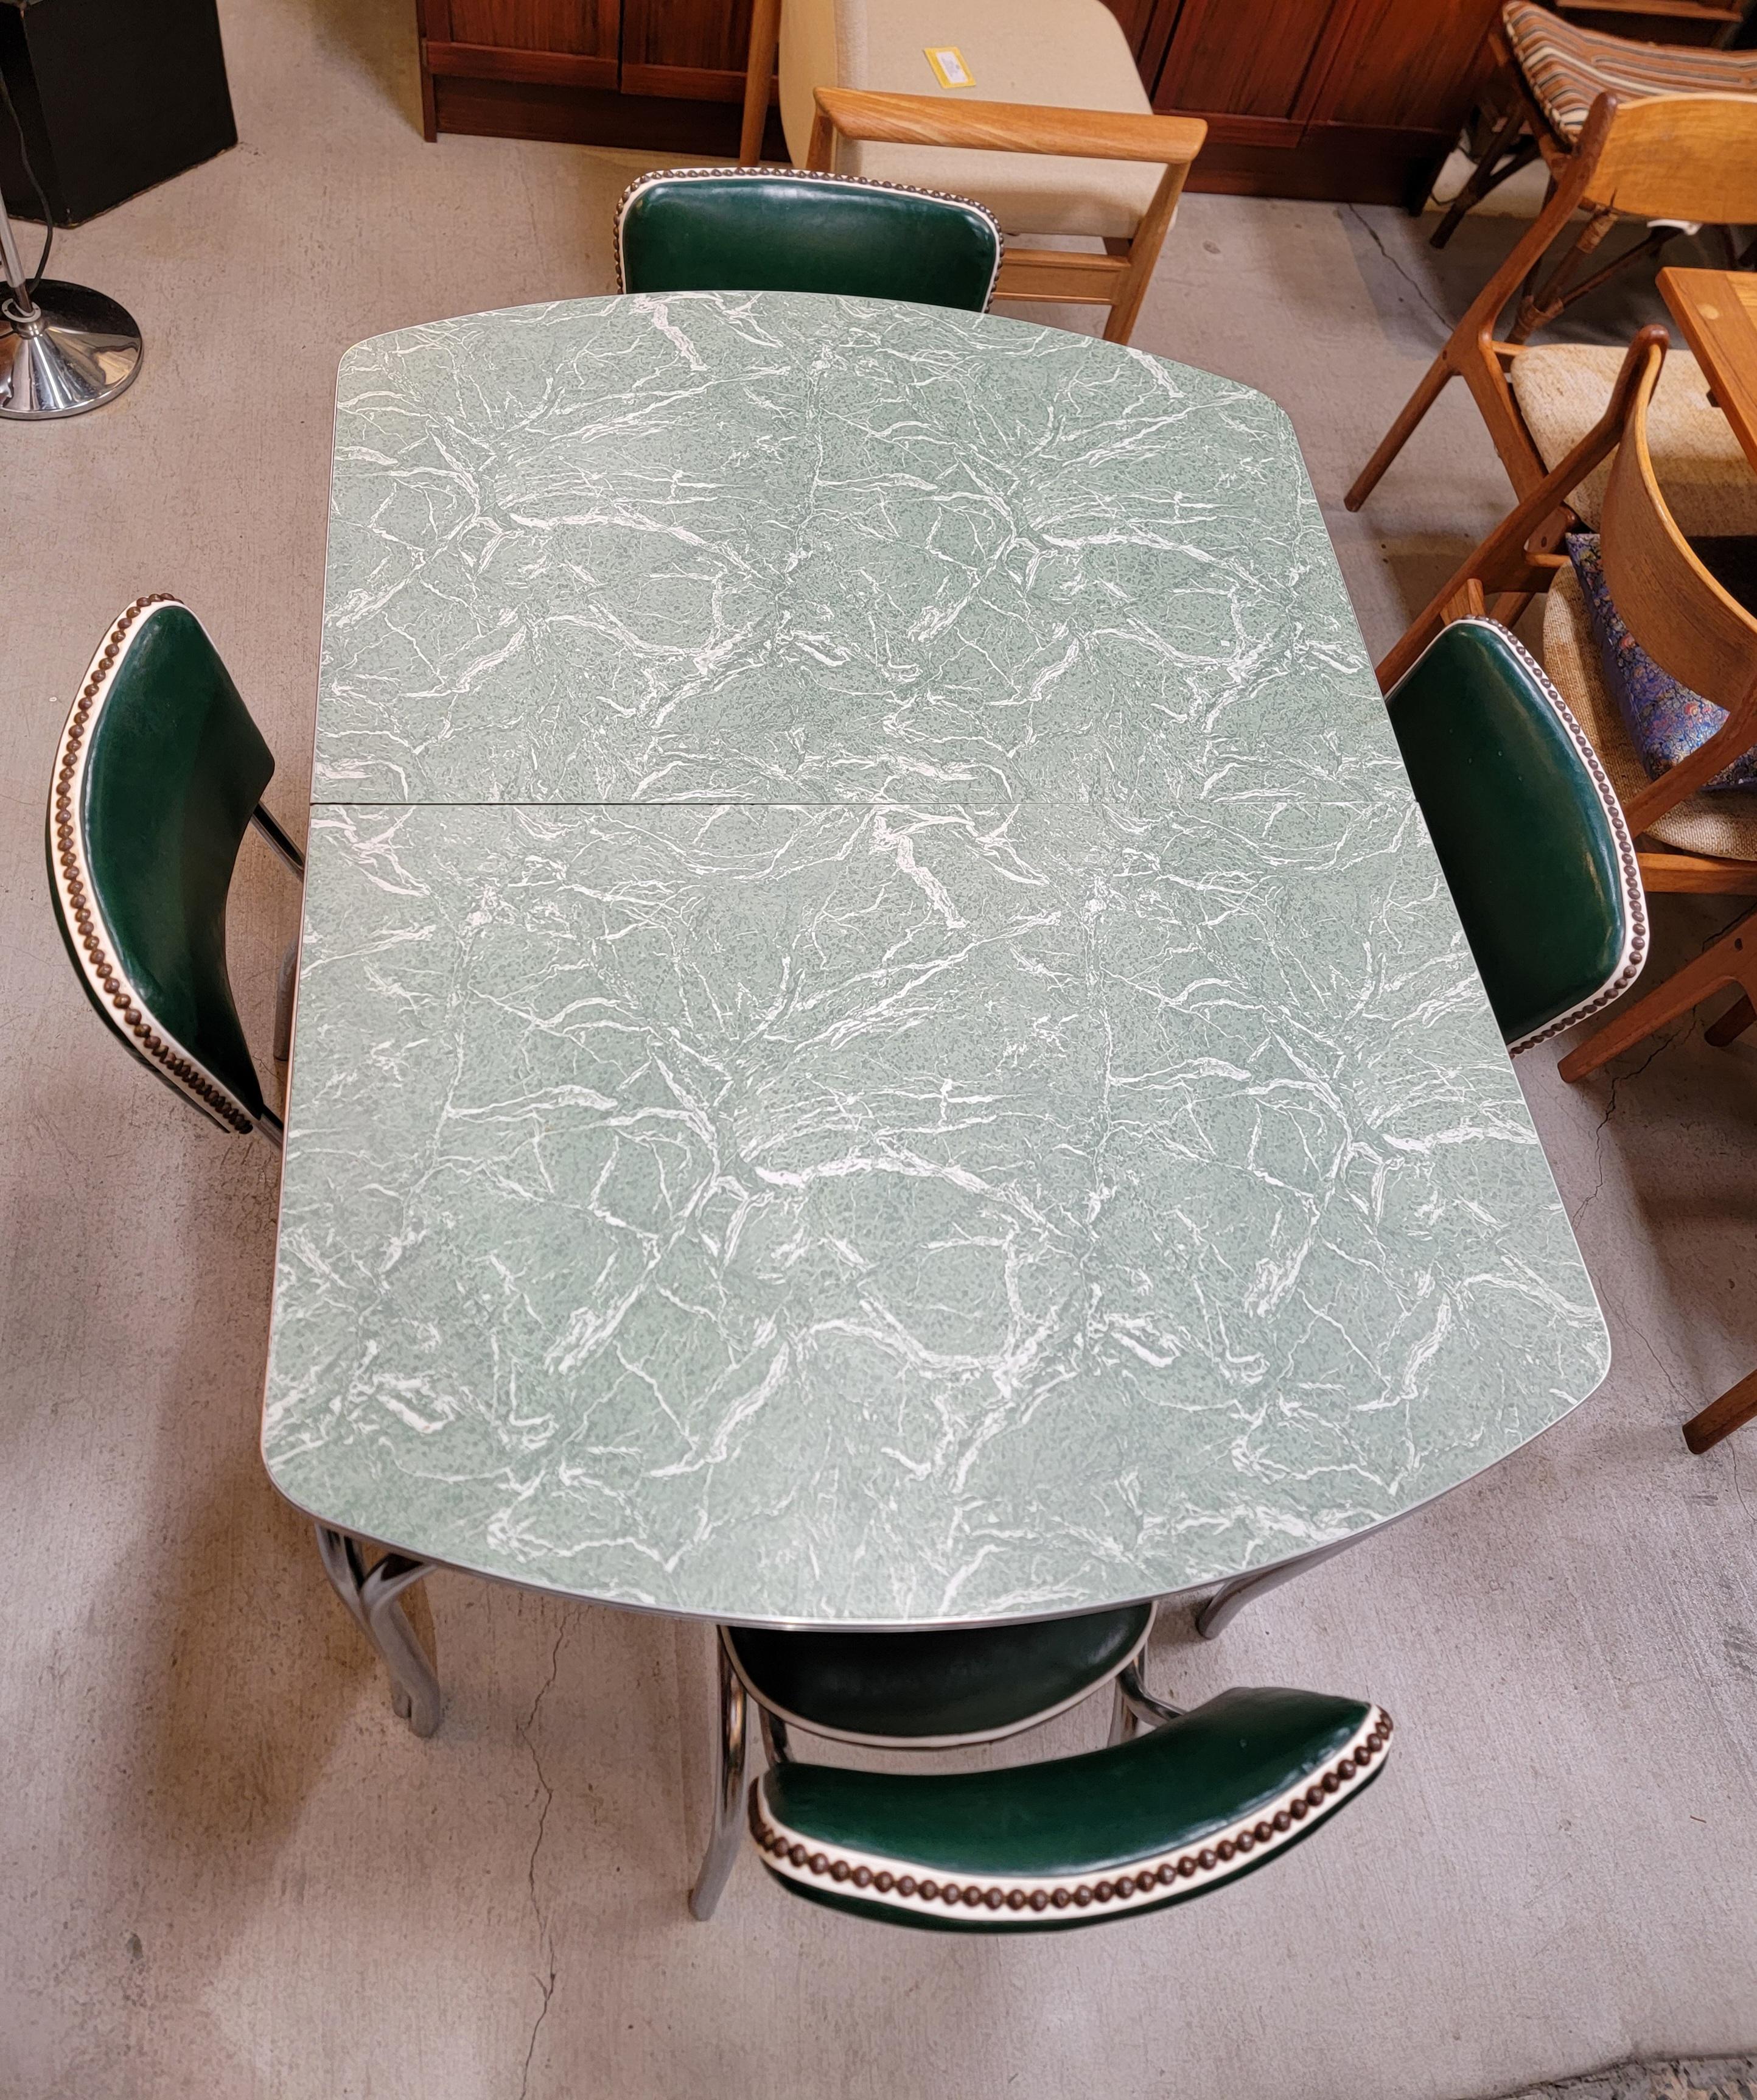 used retro kitchen table and chairs